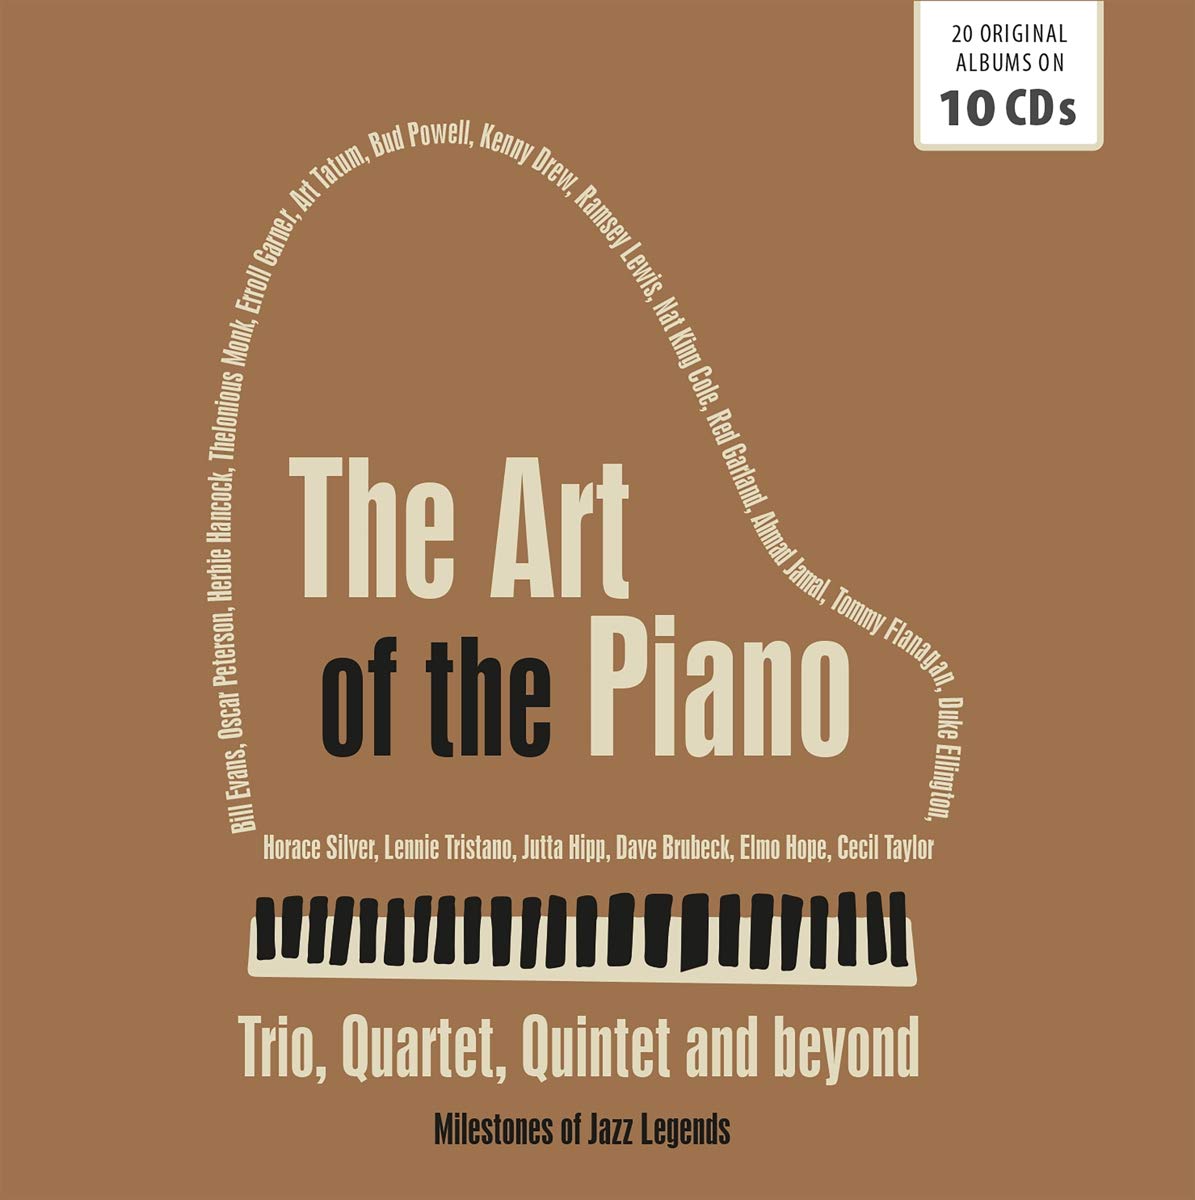 The Art of The Piano: Trio, Quartet, Quintet and Beyond (10 CDs)